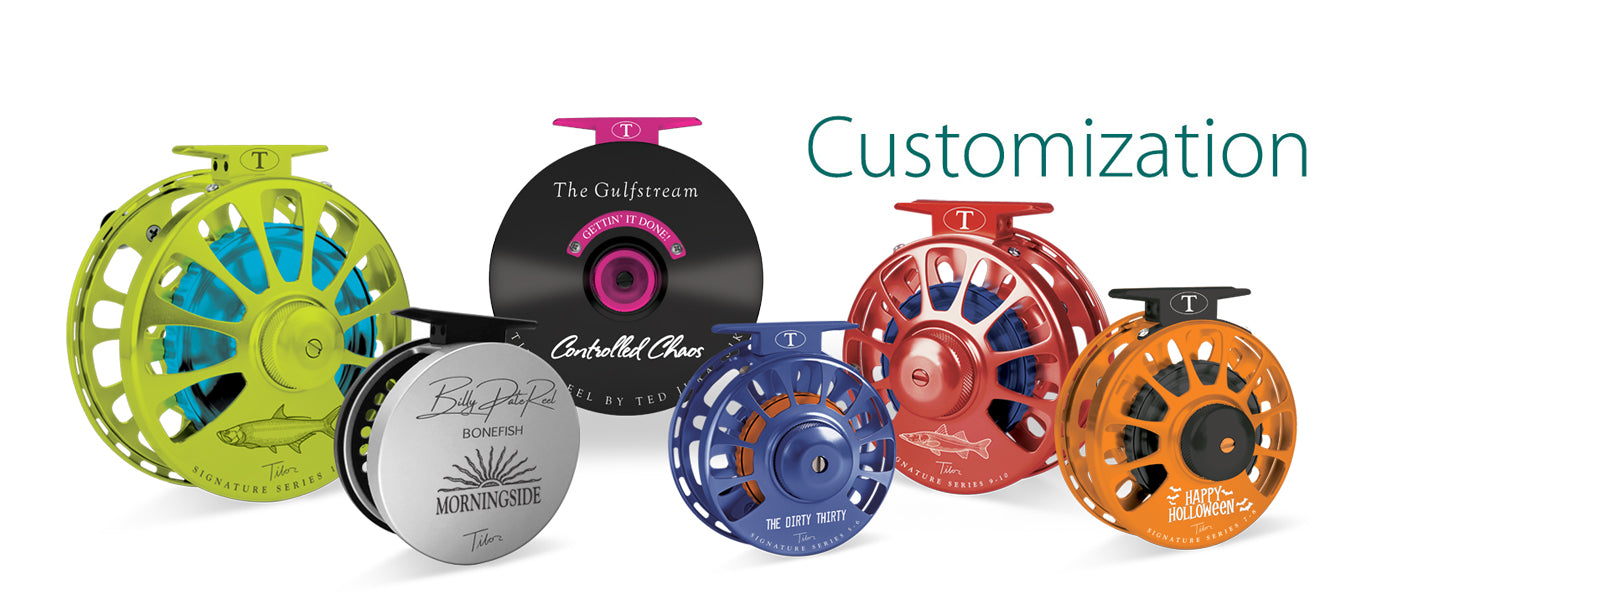 Customize your Reel